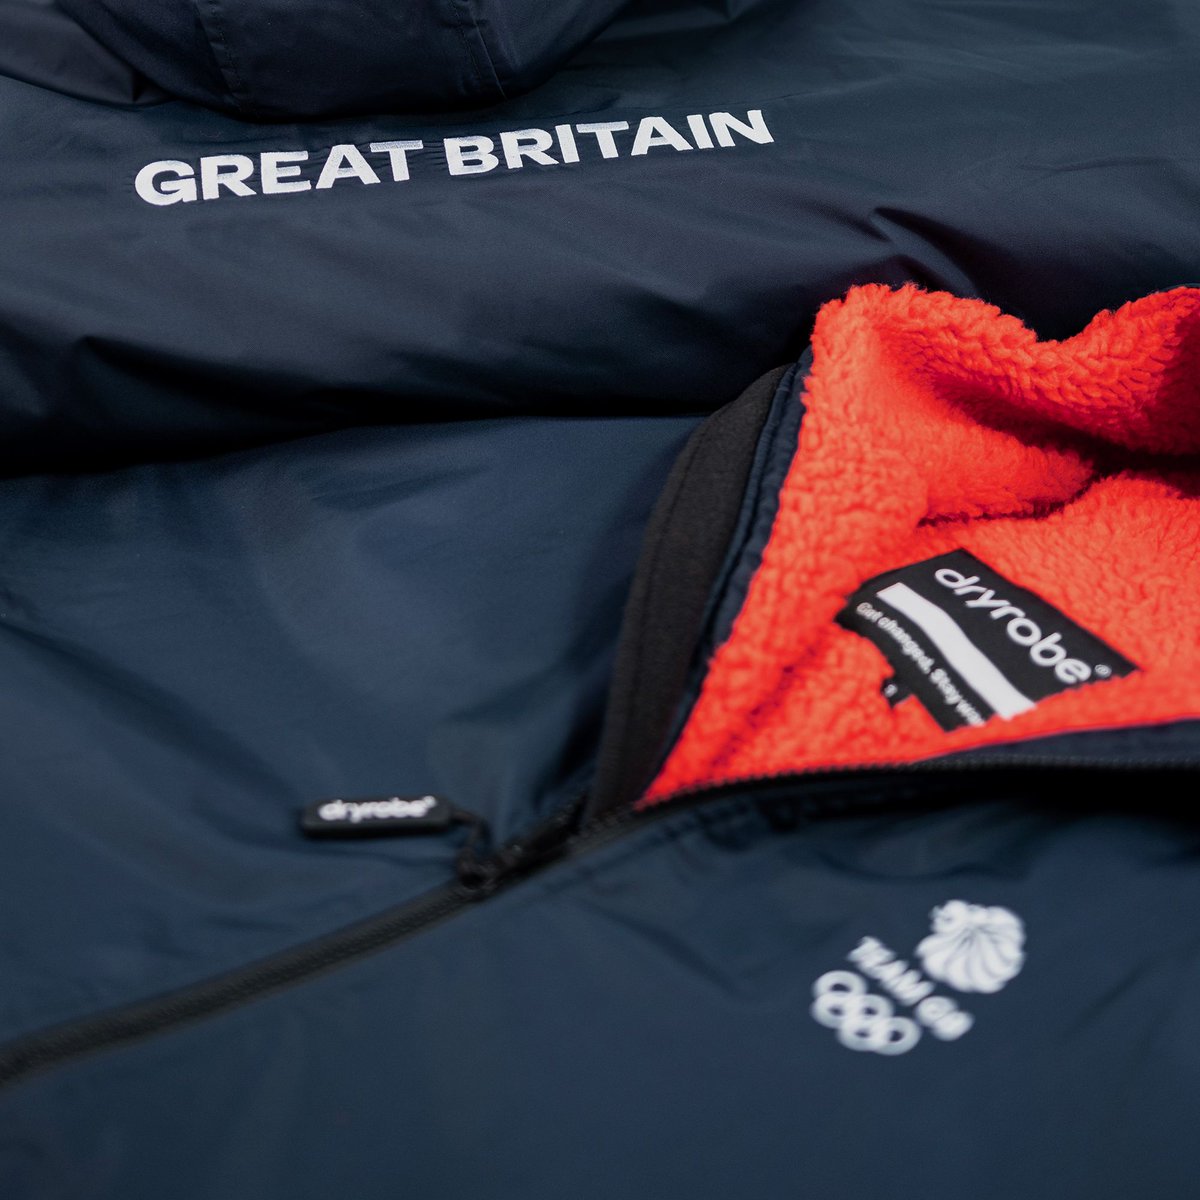 dryrobe® is proud to be supplying Team GB athletes and Paralympics GB athletes again for the Paris 2024 games.